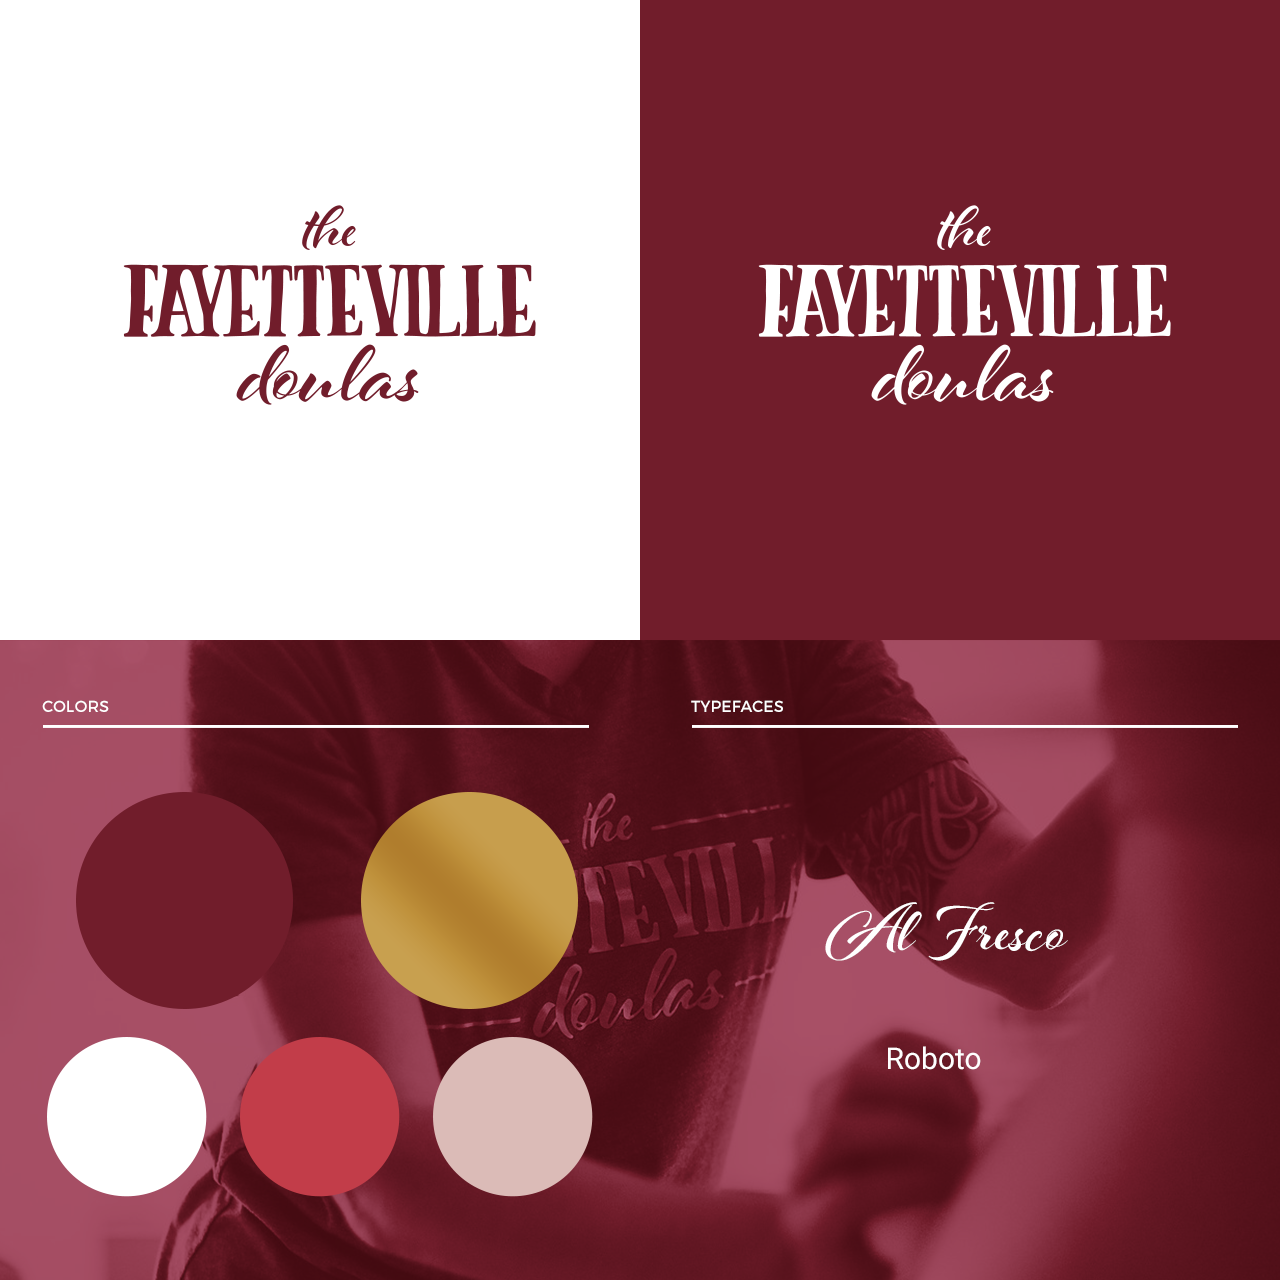 The Fayetteville Doulas branding layout